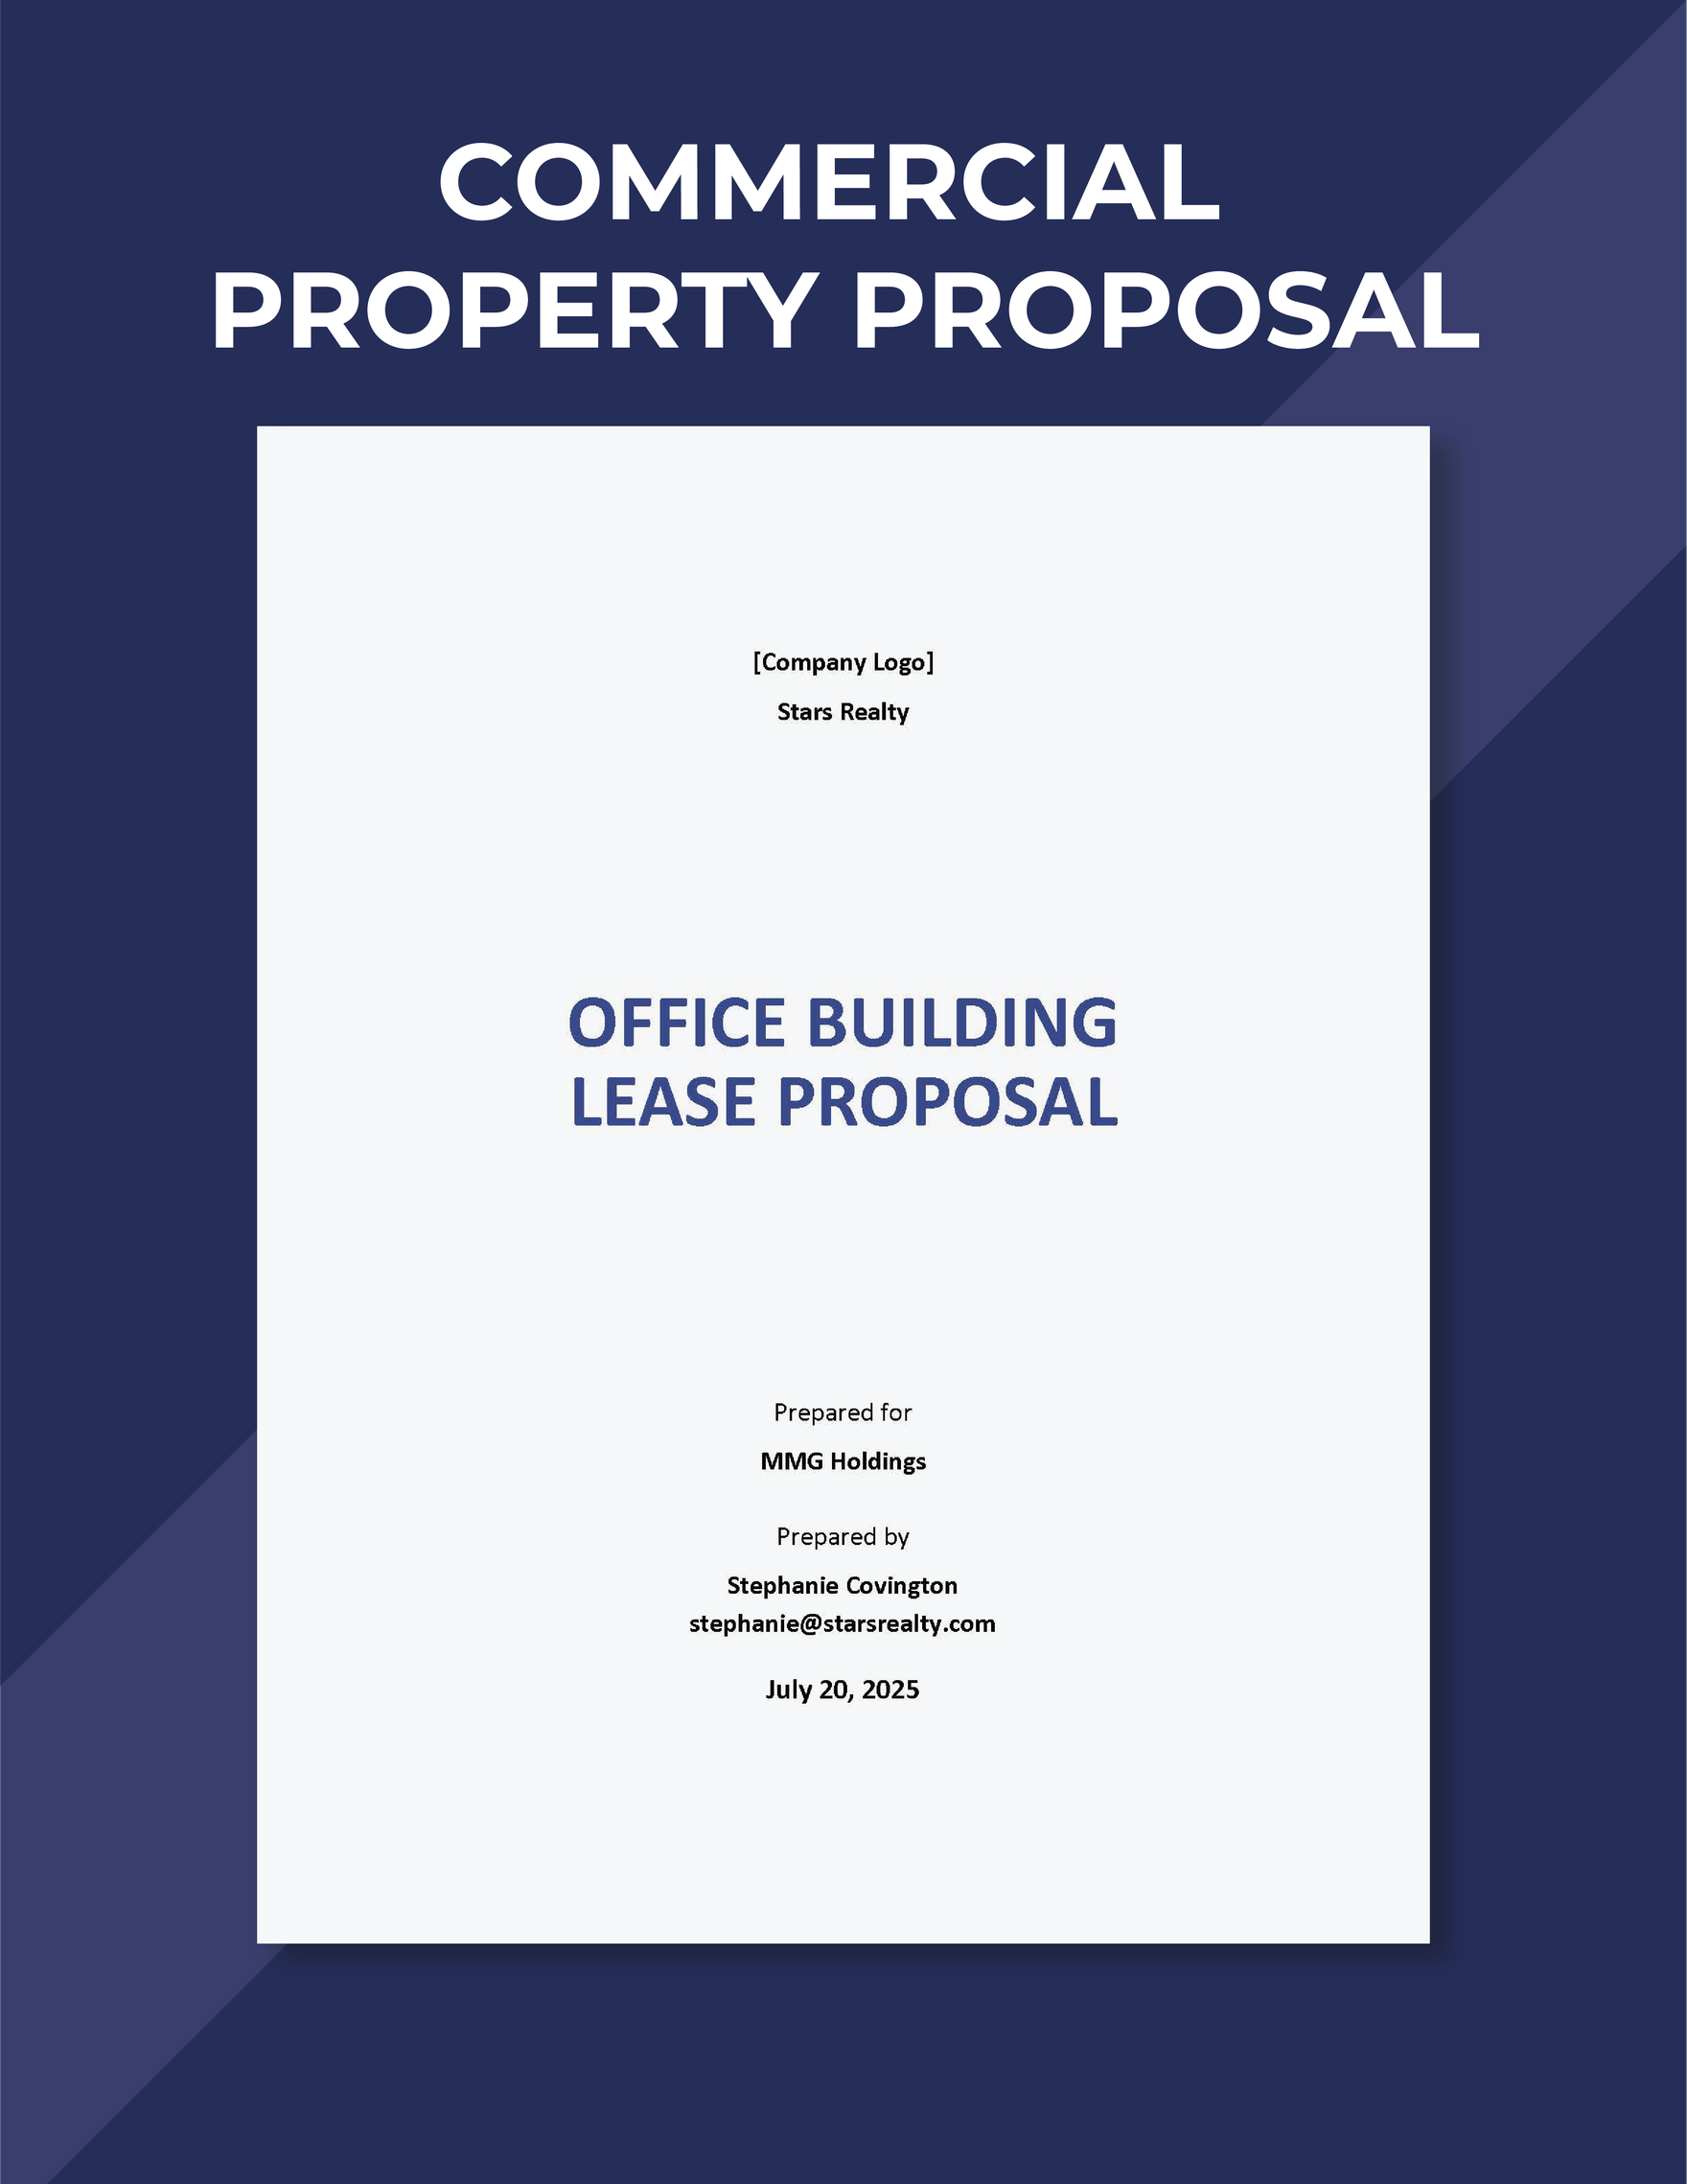 Commercial Property Proposal Template in Word, Google Docs, Apple Pages